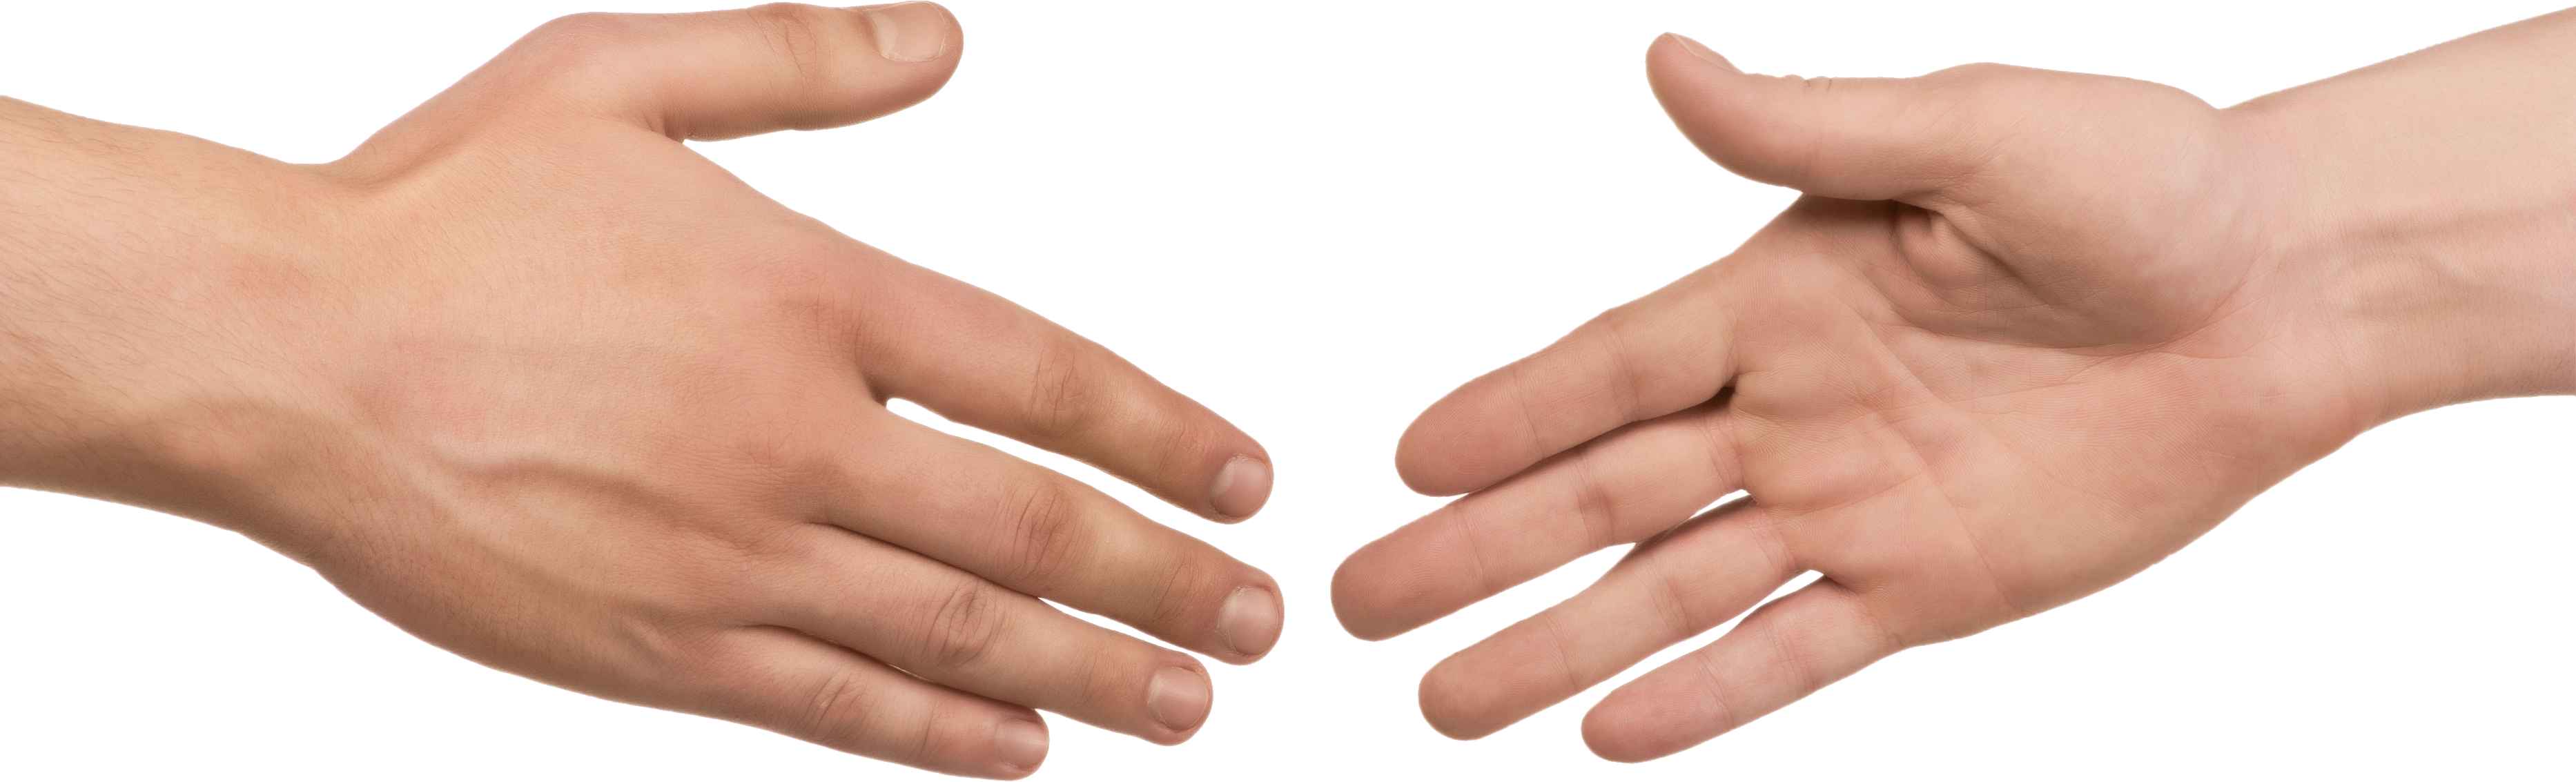 Handshake Png, Hands Image, Free Download - Two Hands, Transparent background PNG HD thumbnail